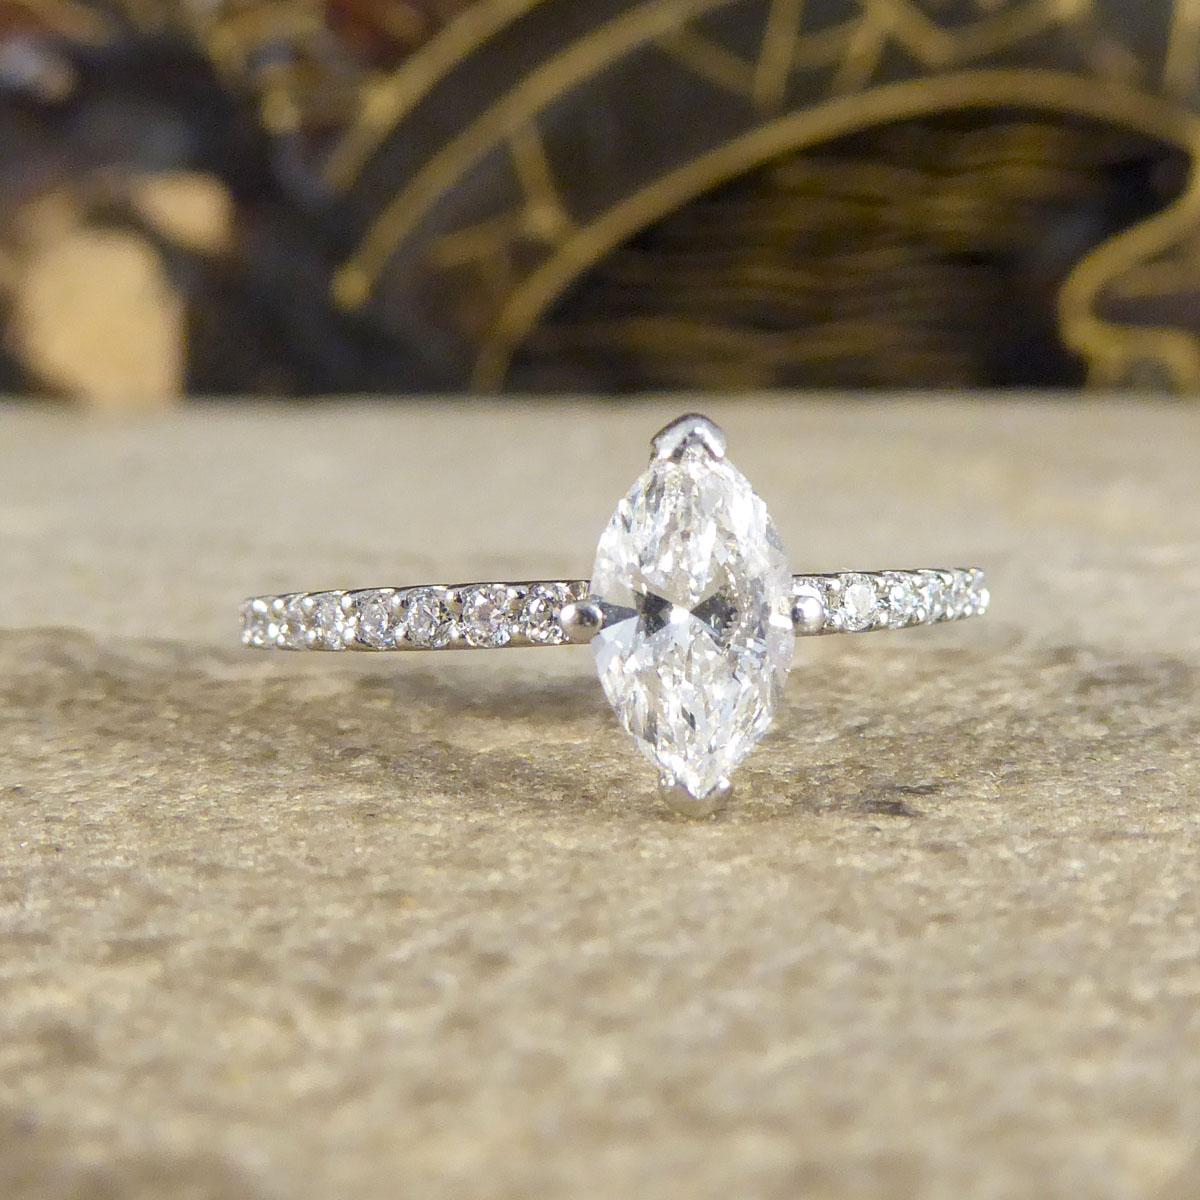 This beautifully sparkly engagement ring holds a very clear and bright Marquise Cut Diamond weighing 0.55ct in a four claw setting. The Marquise Diamond itself is very clear in a basket setting allowing a lot of light to pass through and sparkle